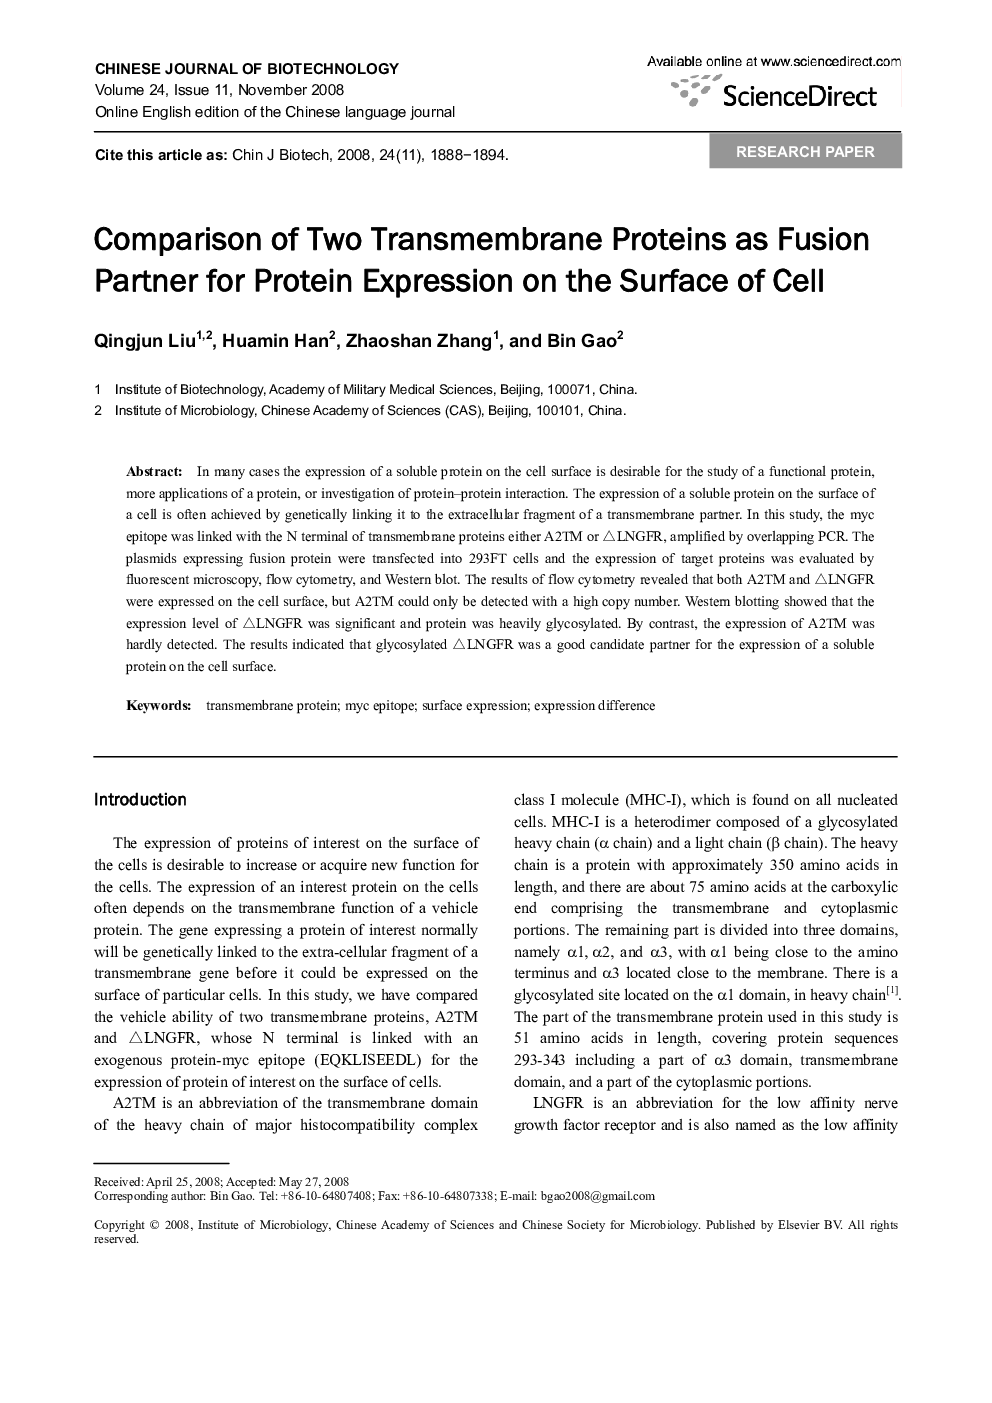 Comparison of Two Transmembrane Proteins as Fusion Partner for Protein Expression on the Surface of Cell